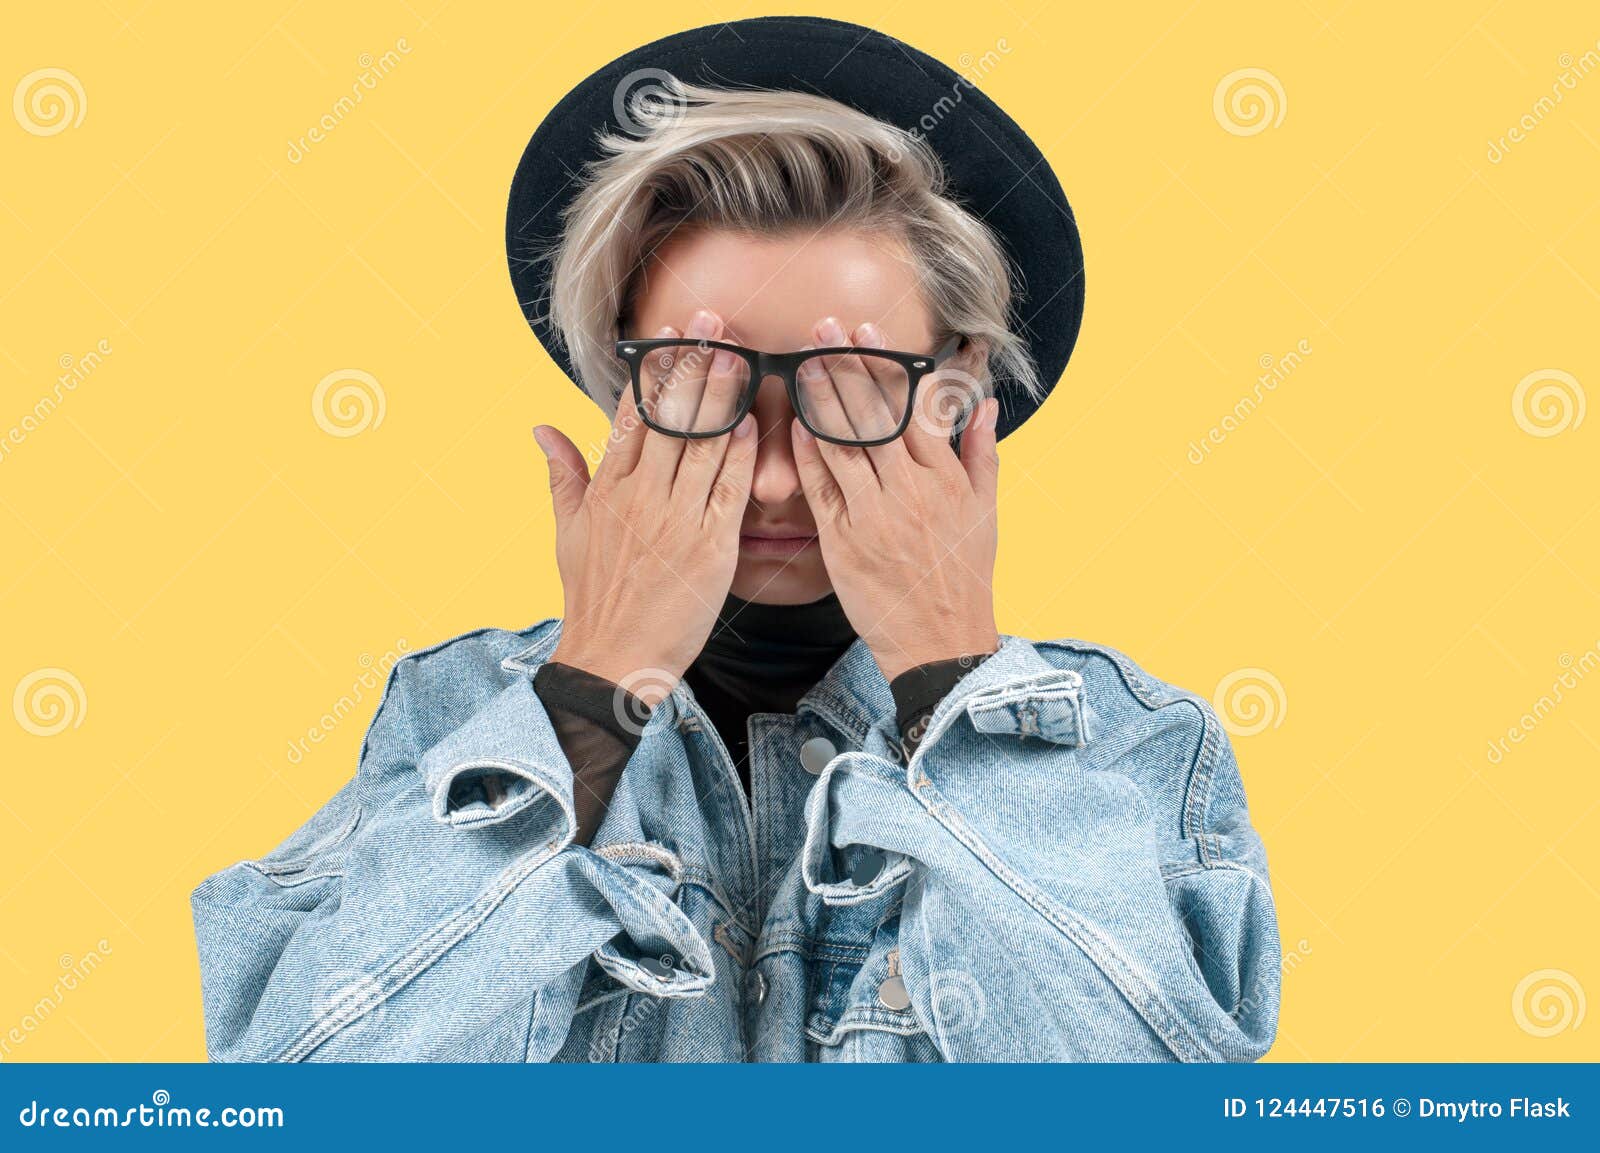 Stylish Woman Closes Eyes with Her Hands in Jeans Jacket and Hat on ...